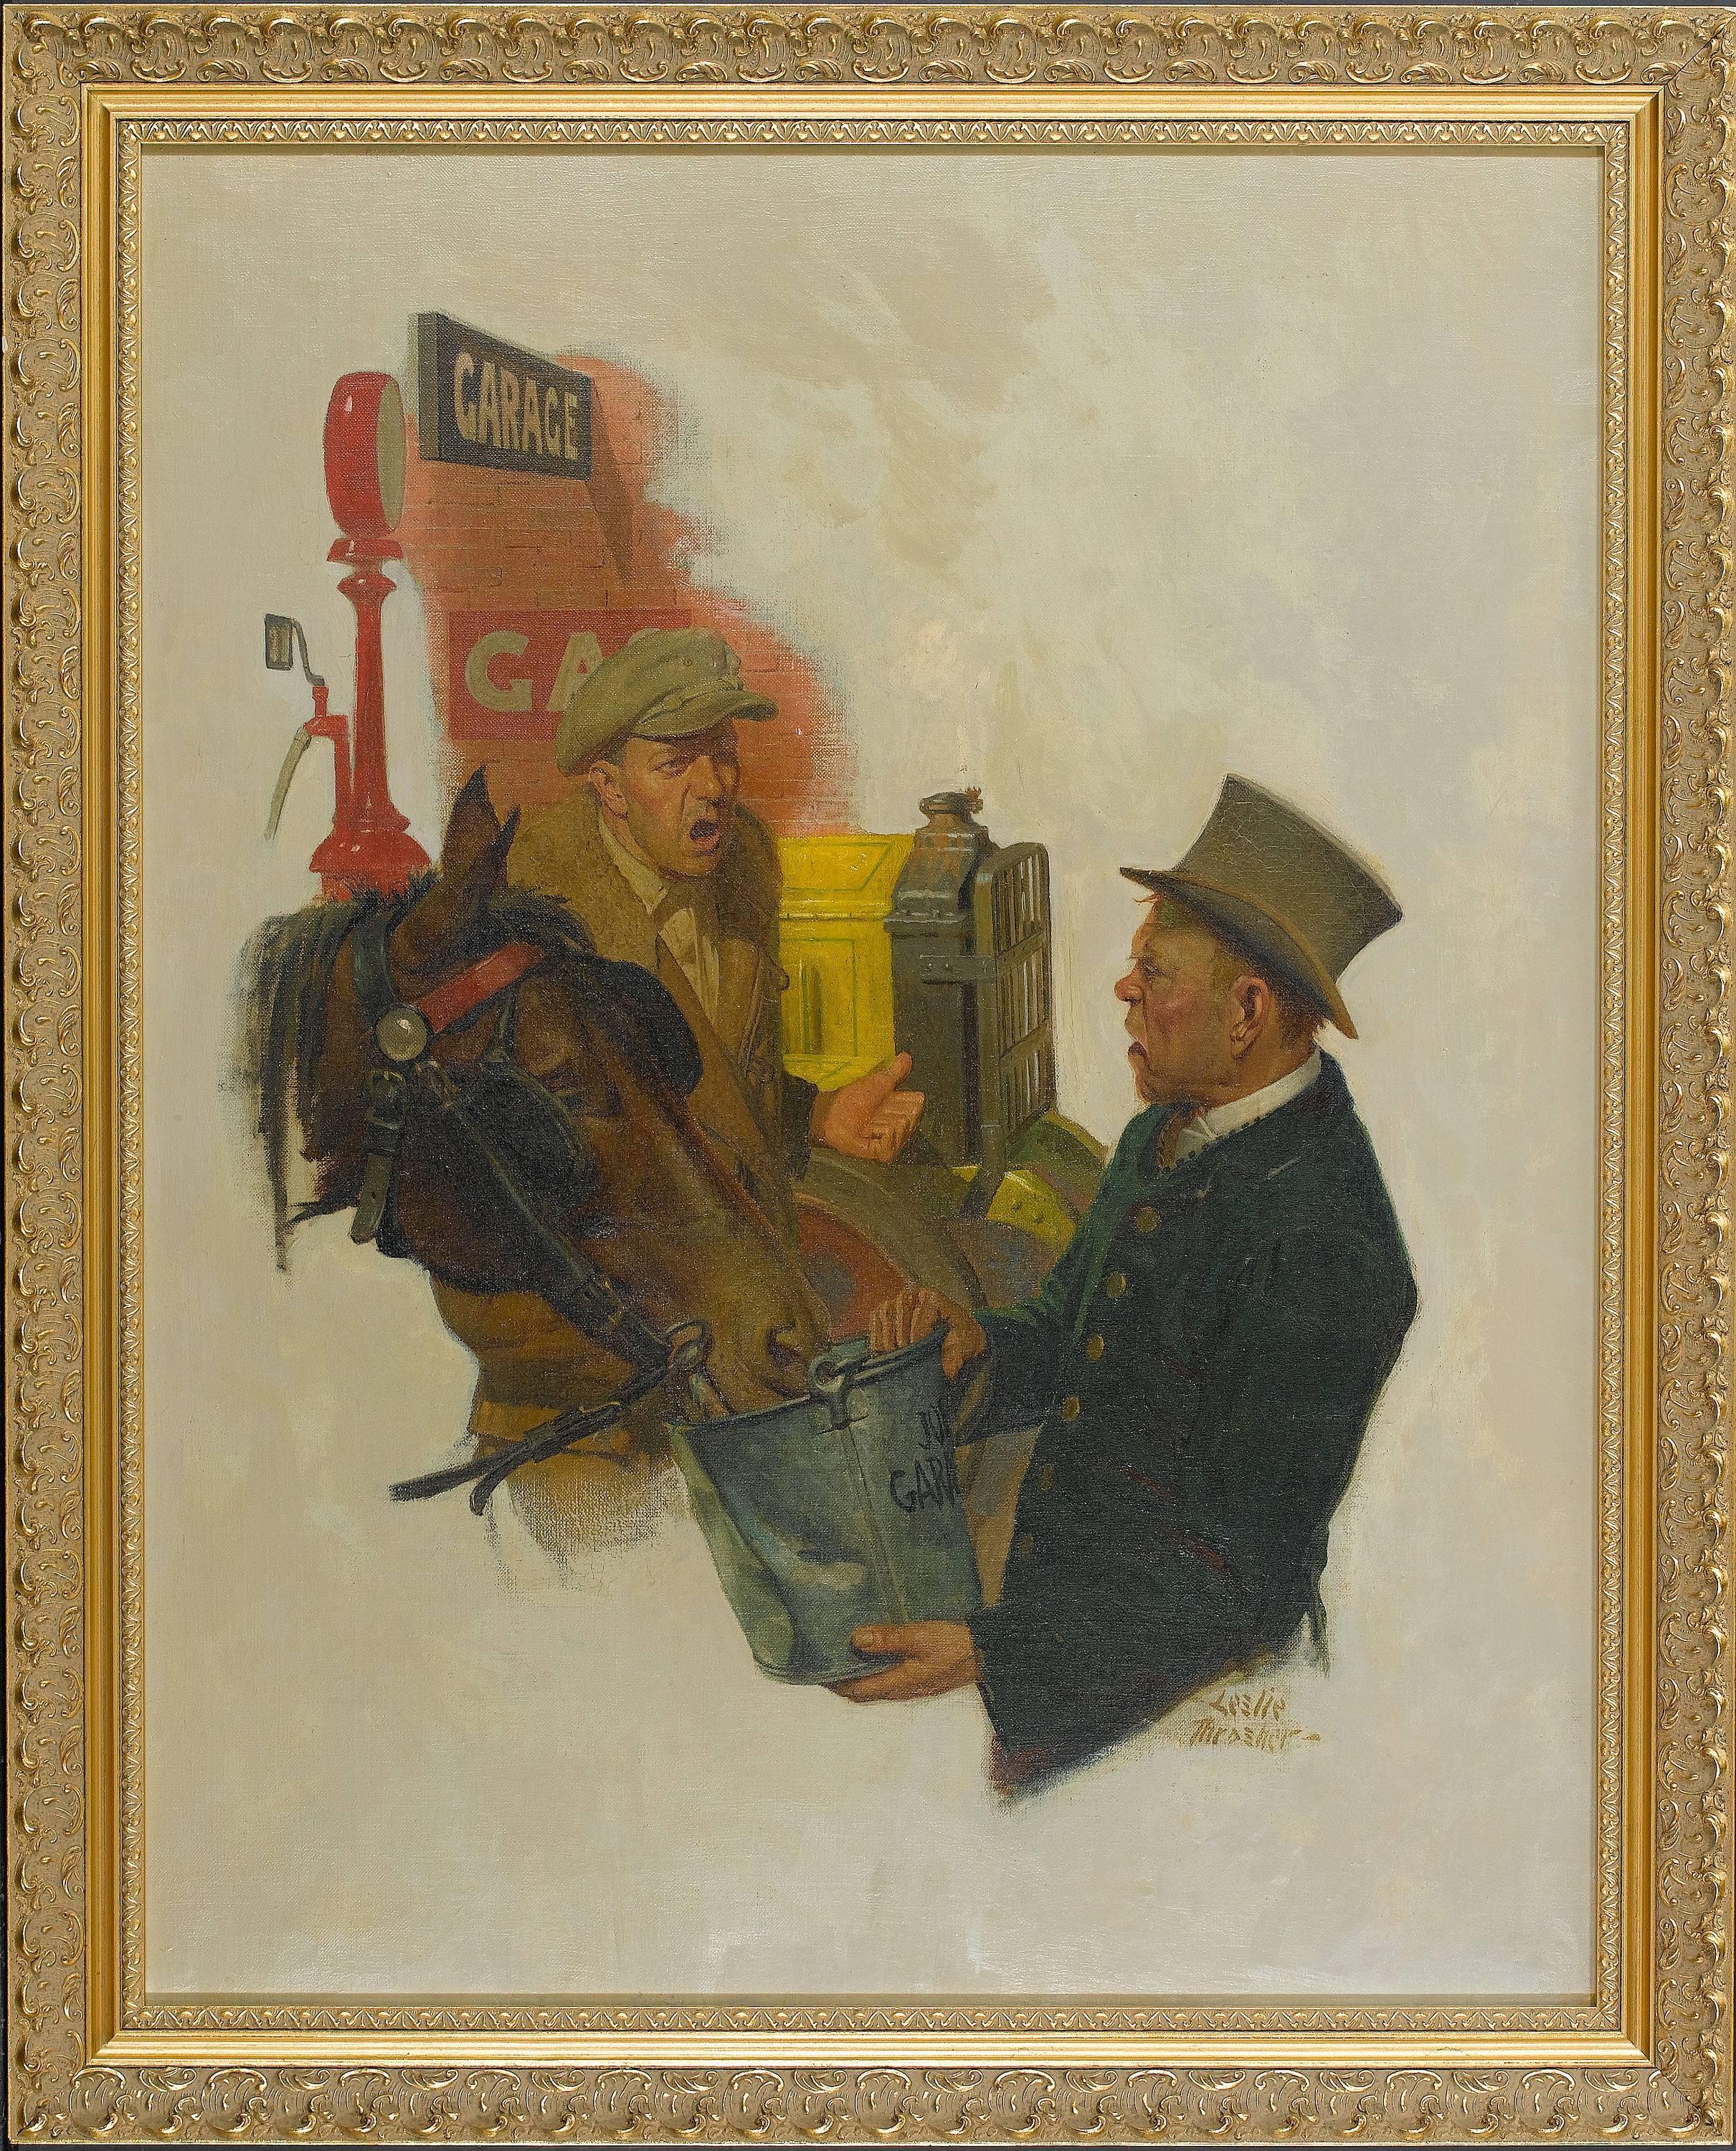 Trouble at the Garage - Painting by Leslie Thrasher